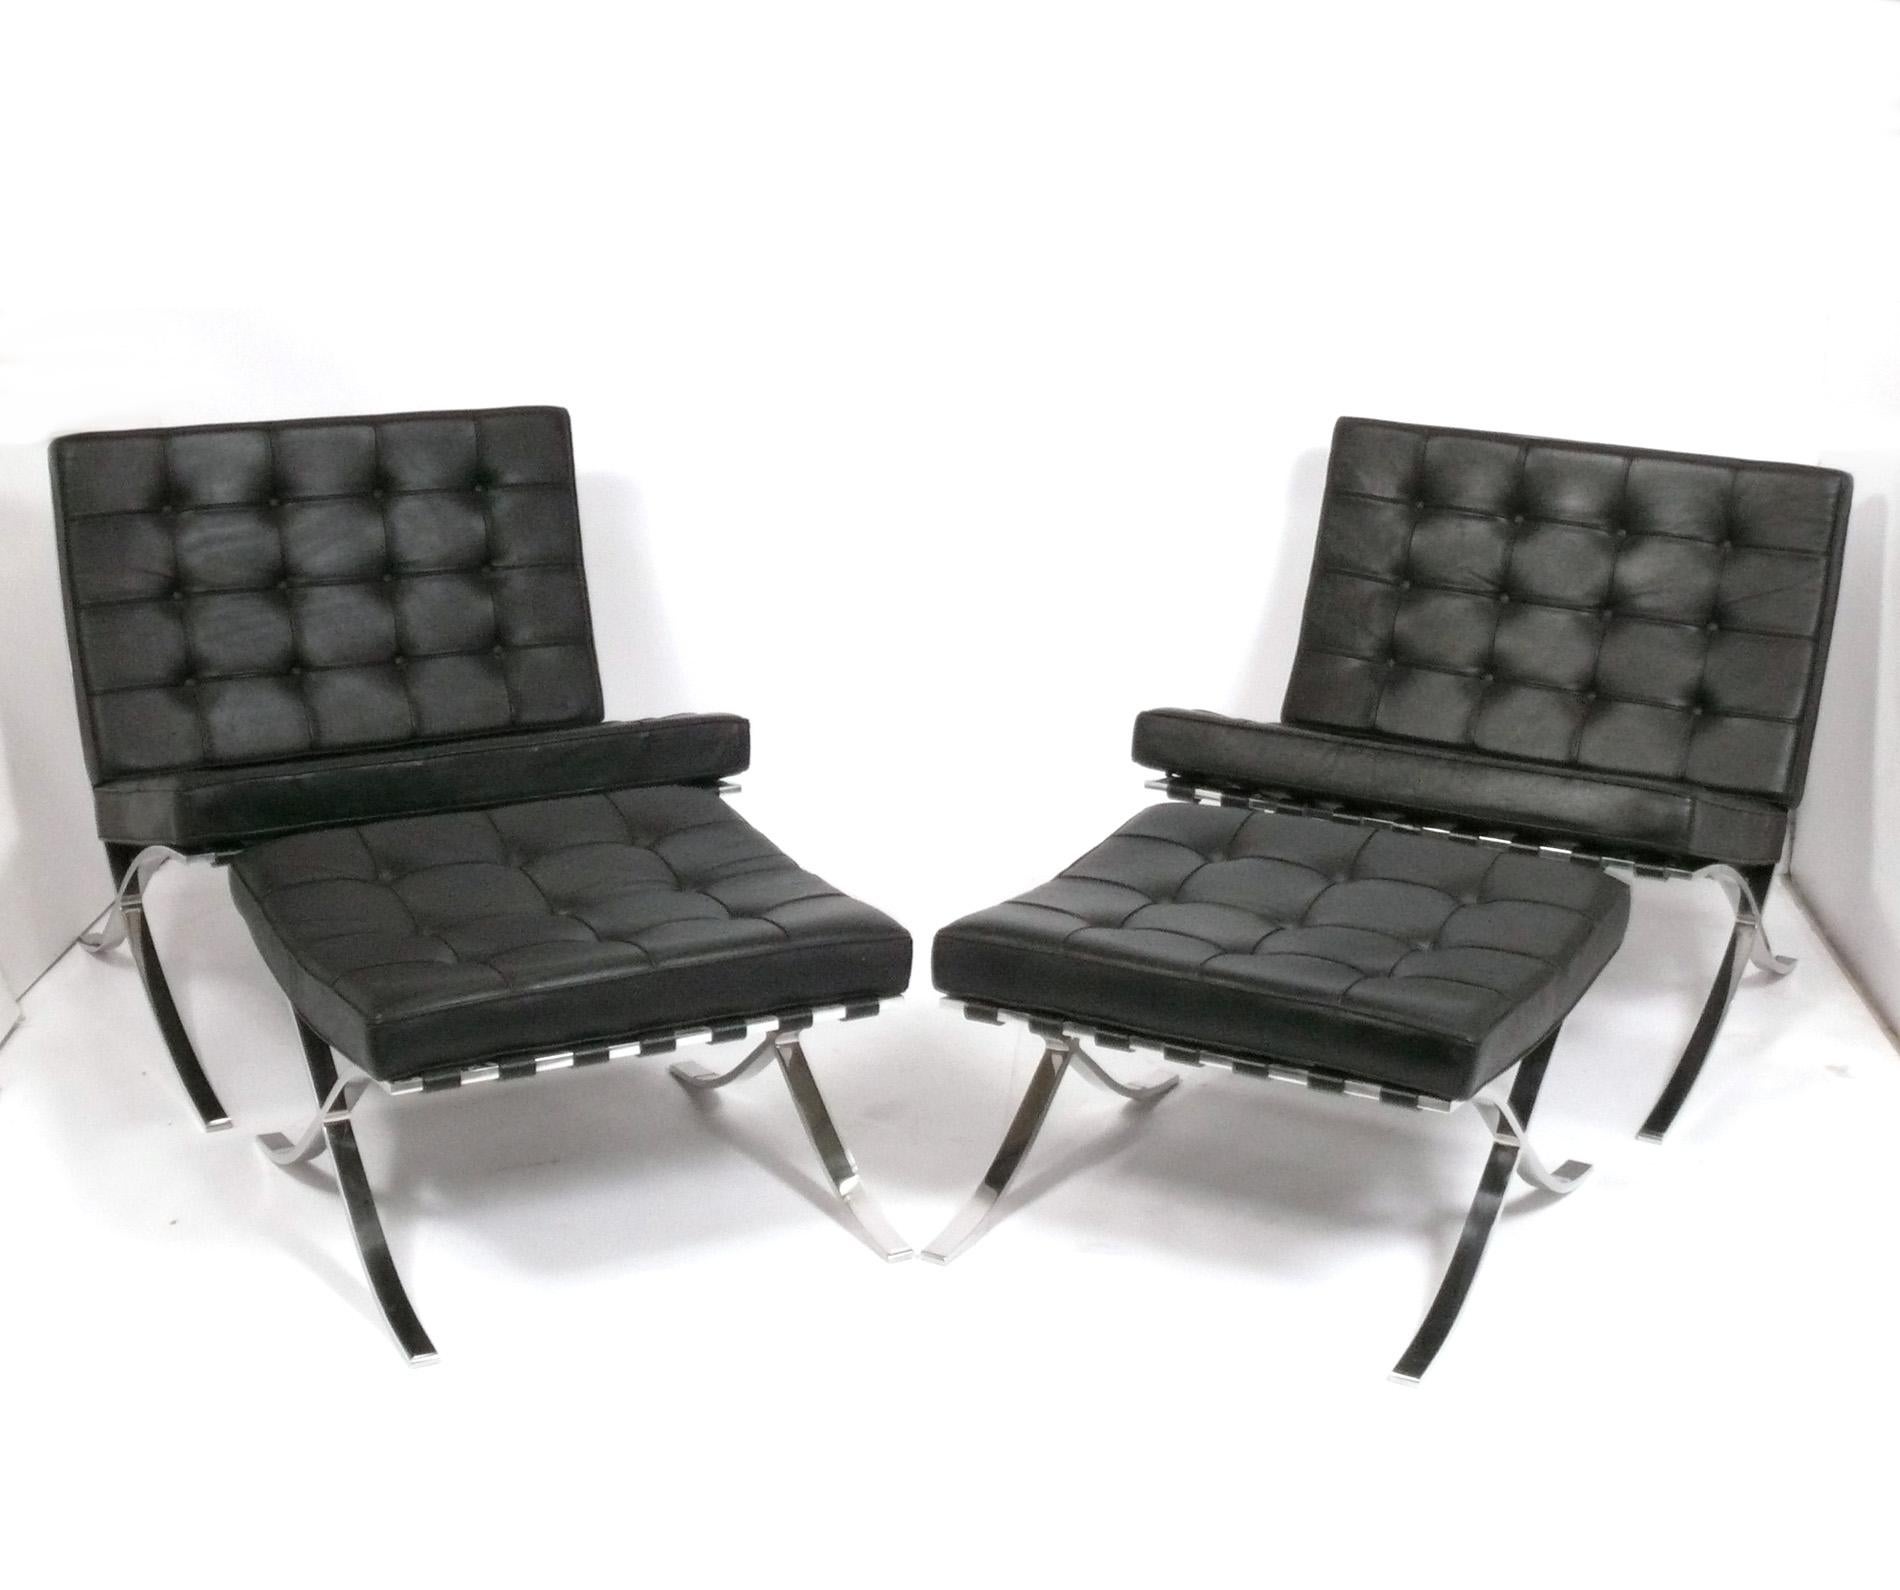 Leather Mies van der Rohe for Knoll Barcelona Ottomans circa 1979 Pair Available For Sale